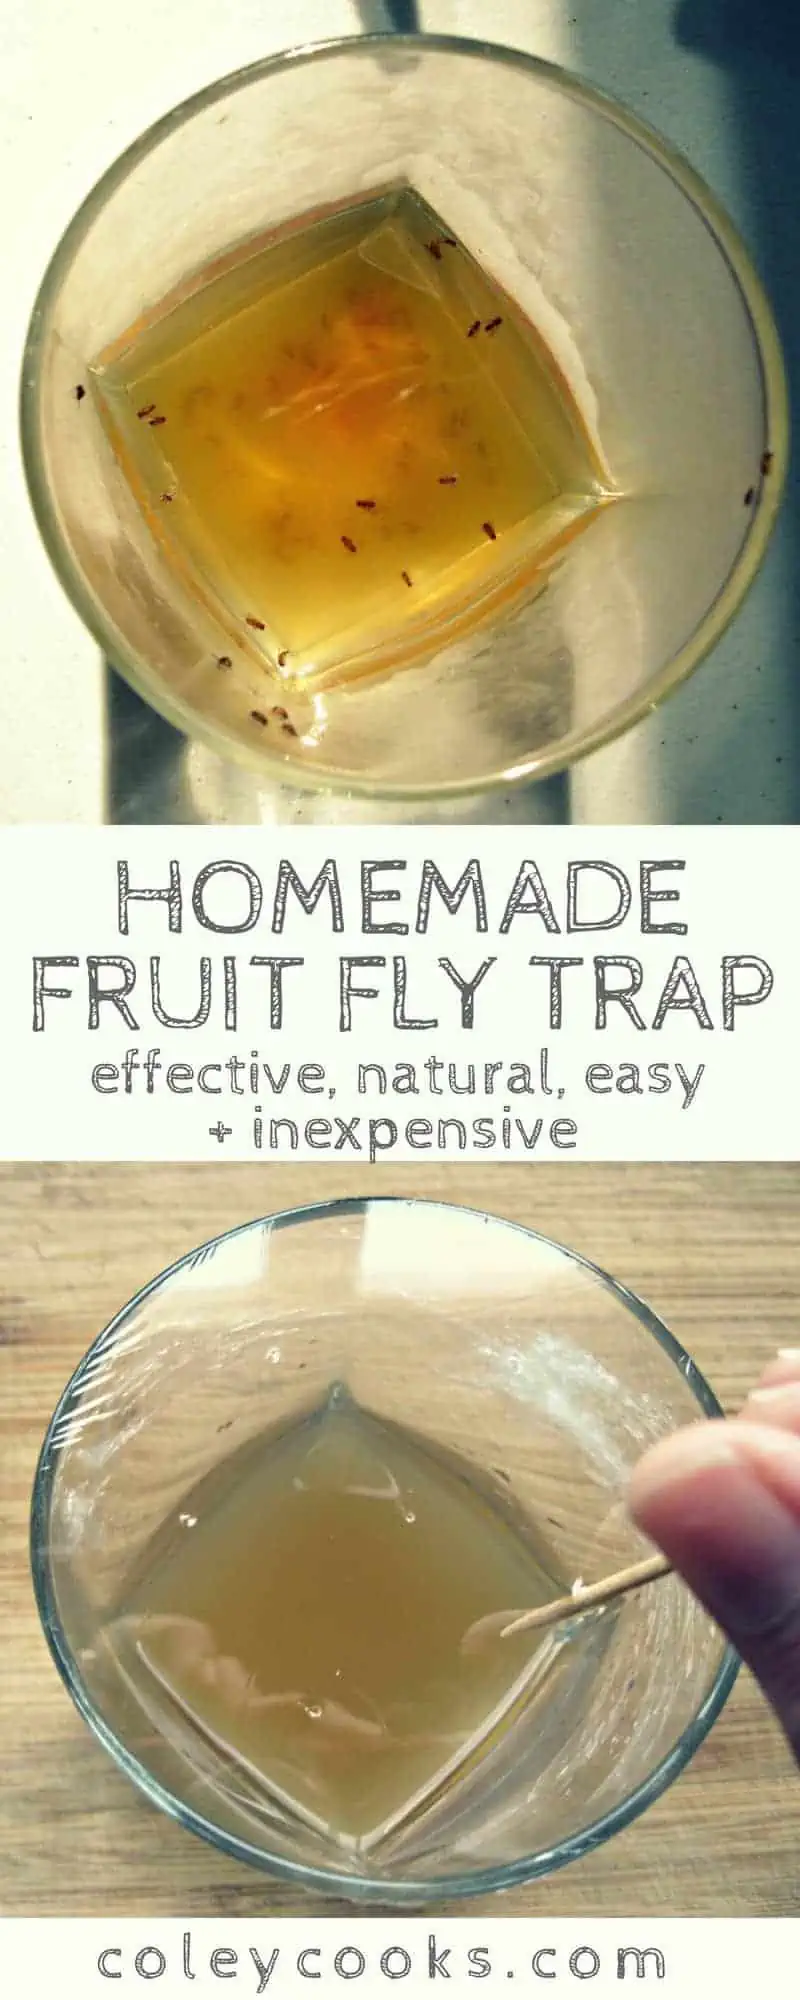 HOMEMADE FRUIT FLY TRAP | All natural fruit fly trap made using common kitchen ingredients. Effective, easy and inexpensive! . #easy #fruitflies #allnatural #DIY | ColeyCooks.com